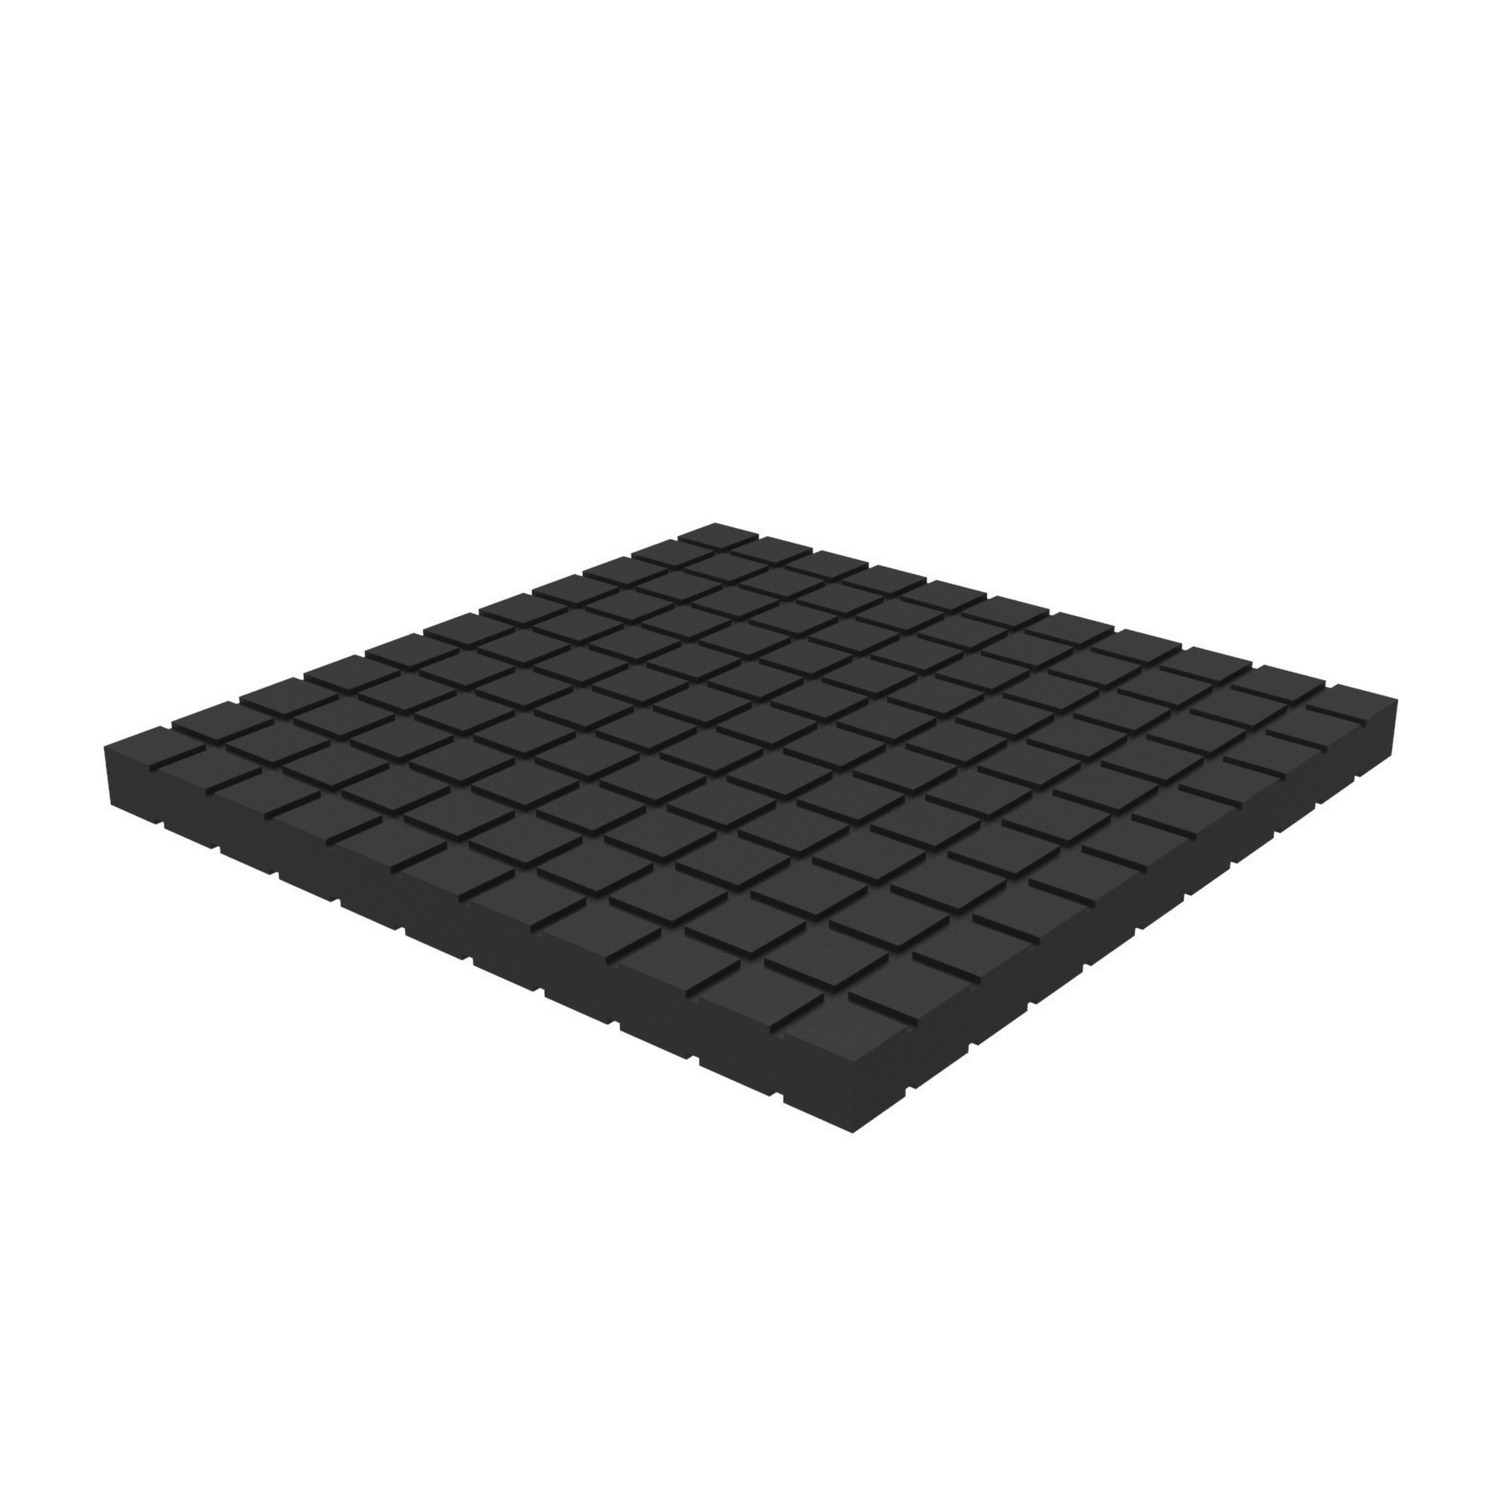 Anti-vibration Pads The pad can be cut to suit the application as required. Differs from a plain rubber mat as the squared units can deform - improving its anti-vibration features.